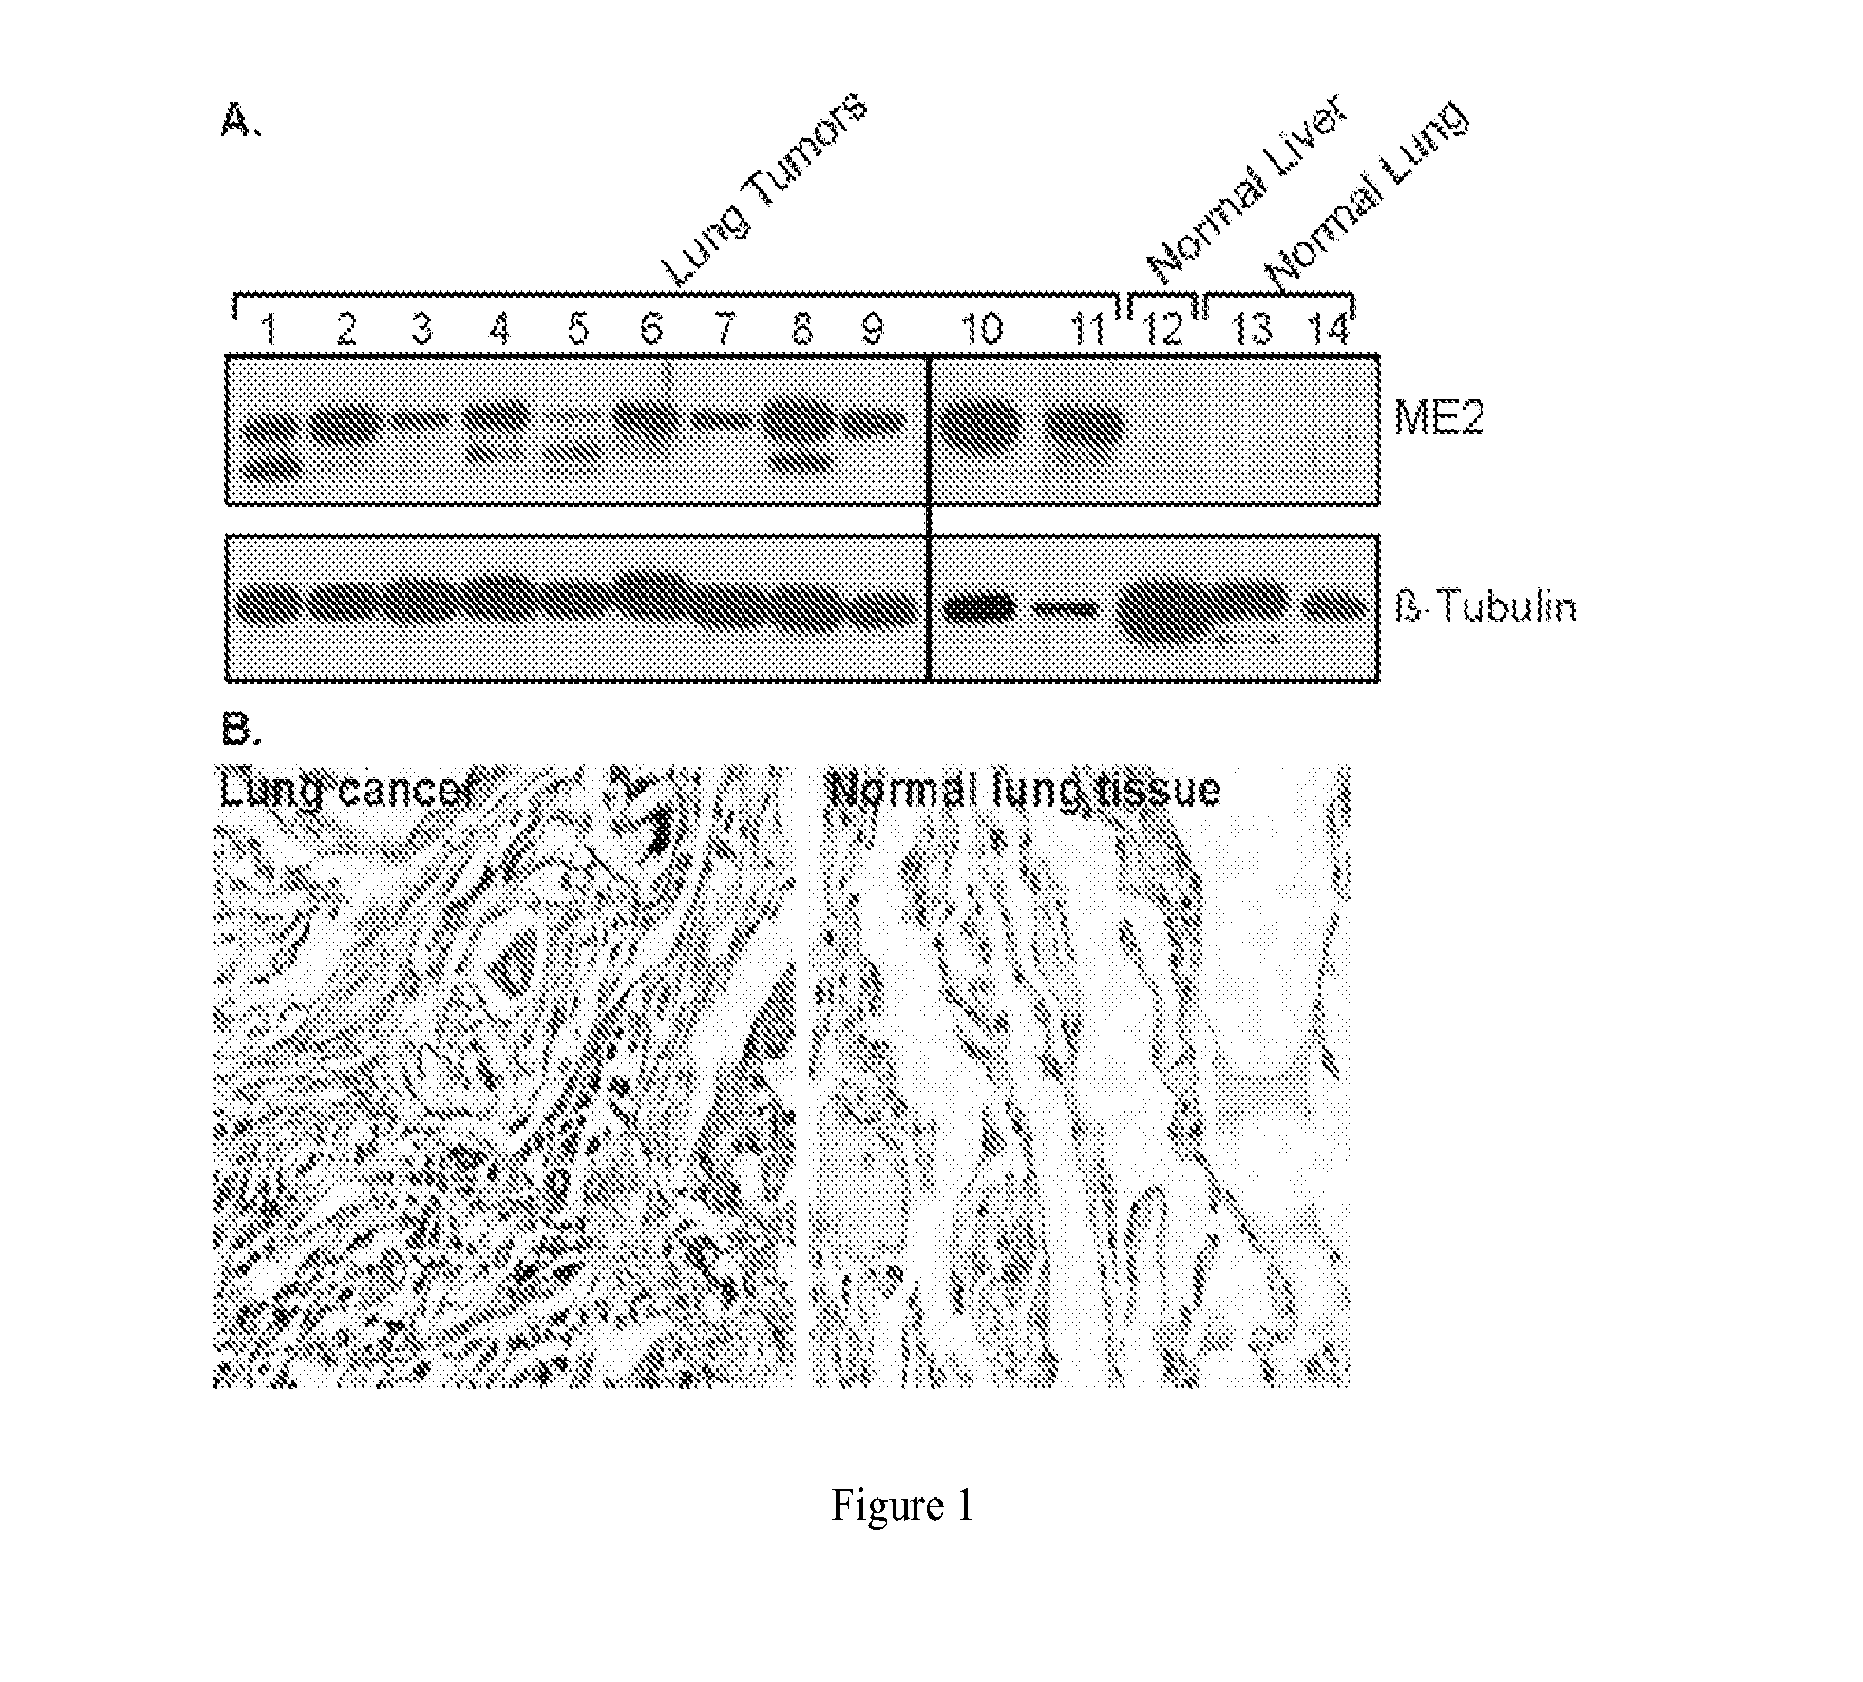 Methods of treating proliferative disorders with malate or derivatives thereof